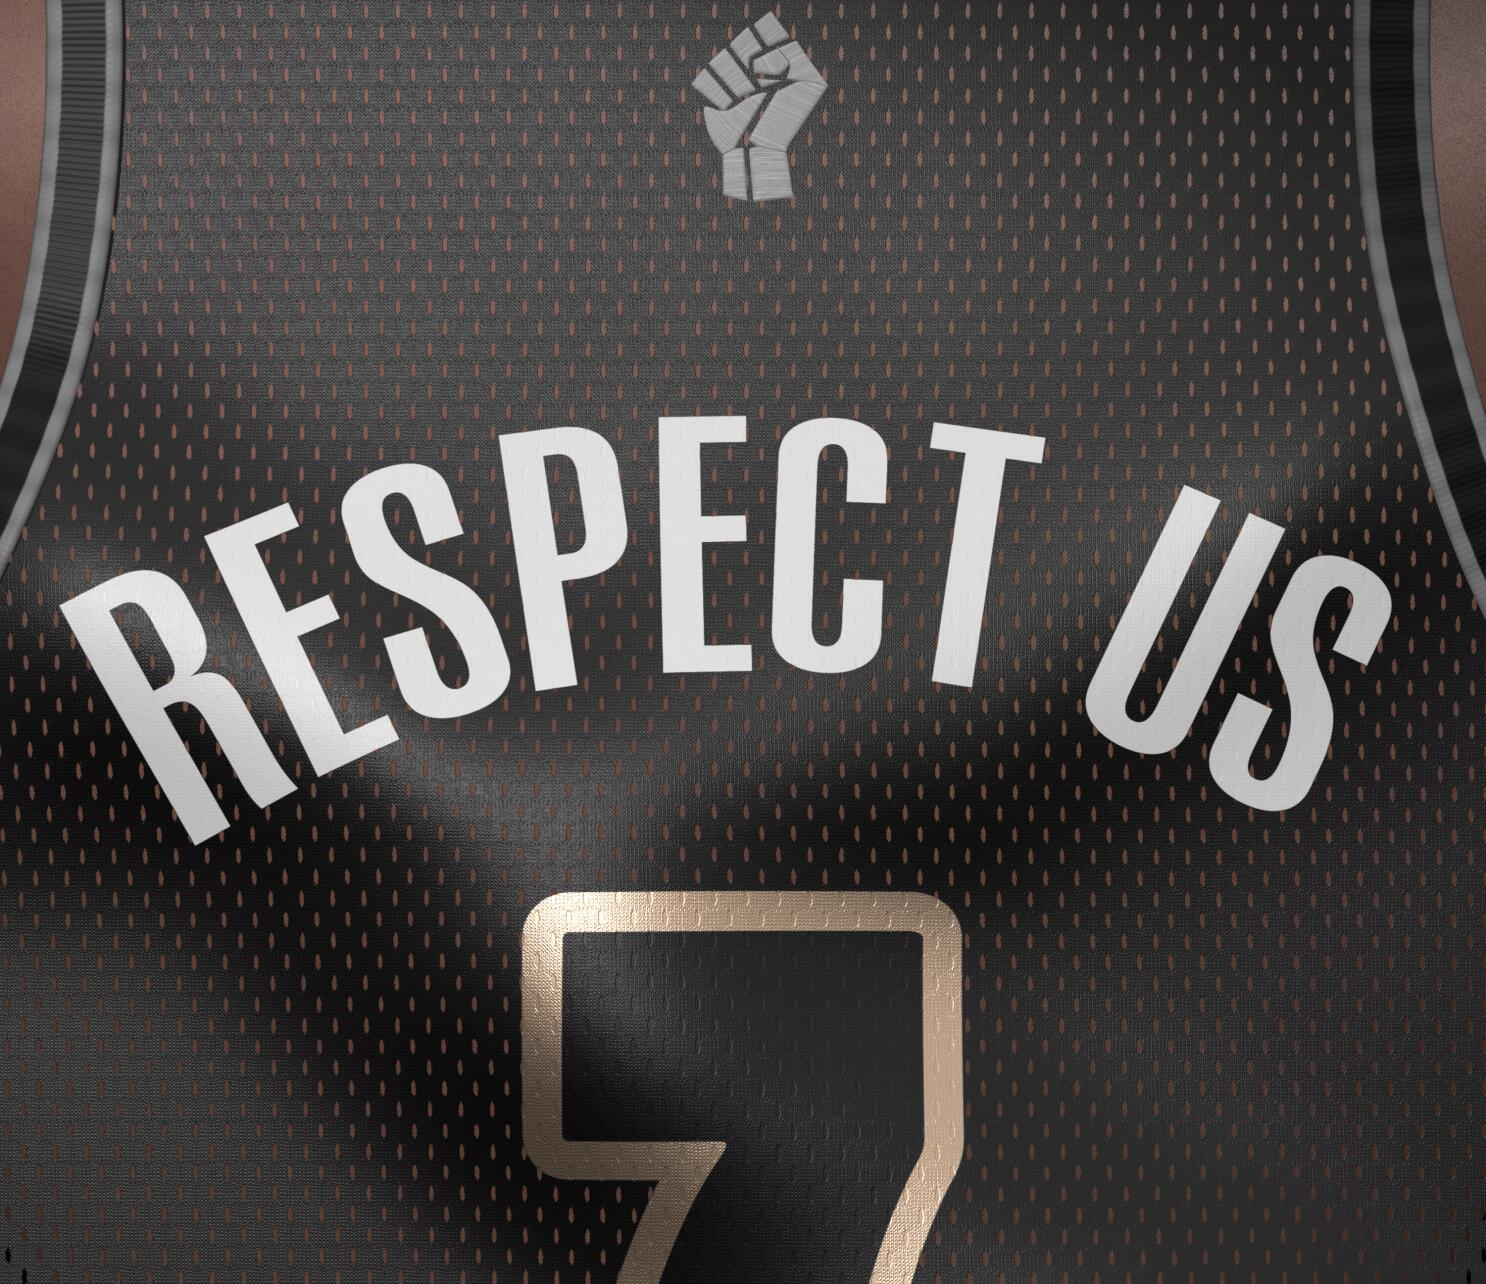 NBA players will wear messages on their jerseys. Here's the full list.